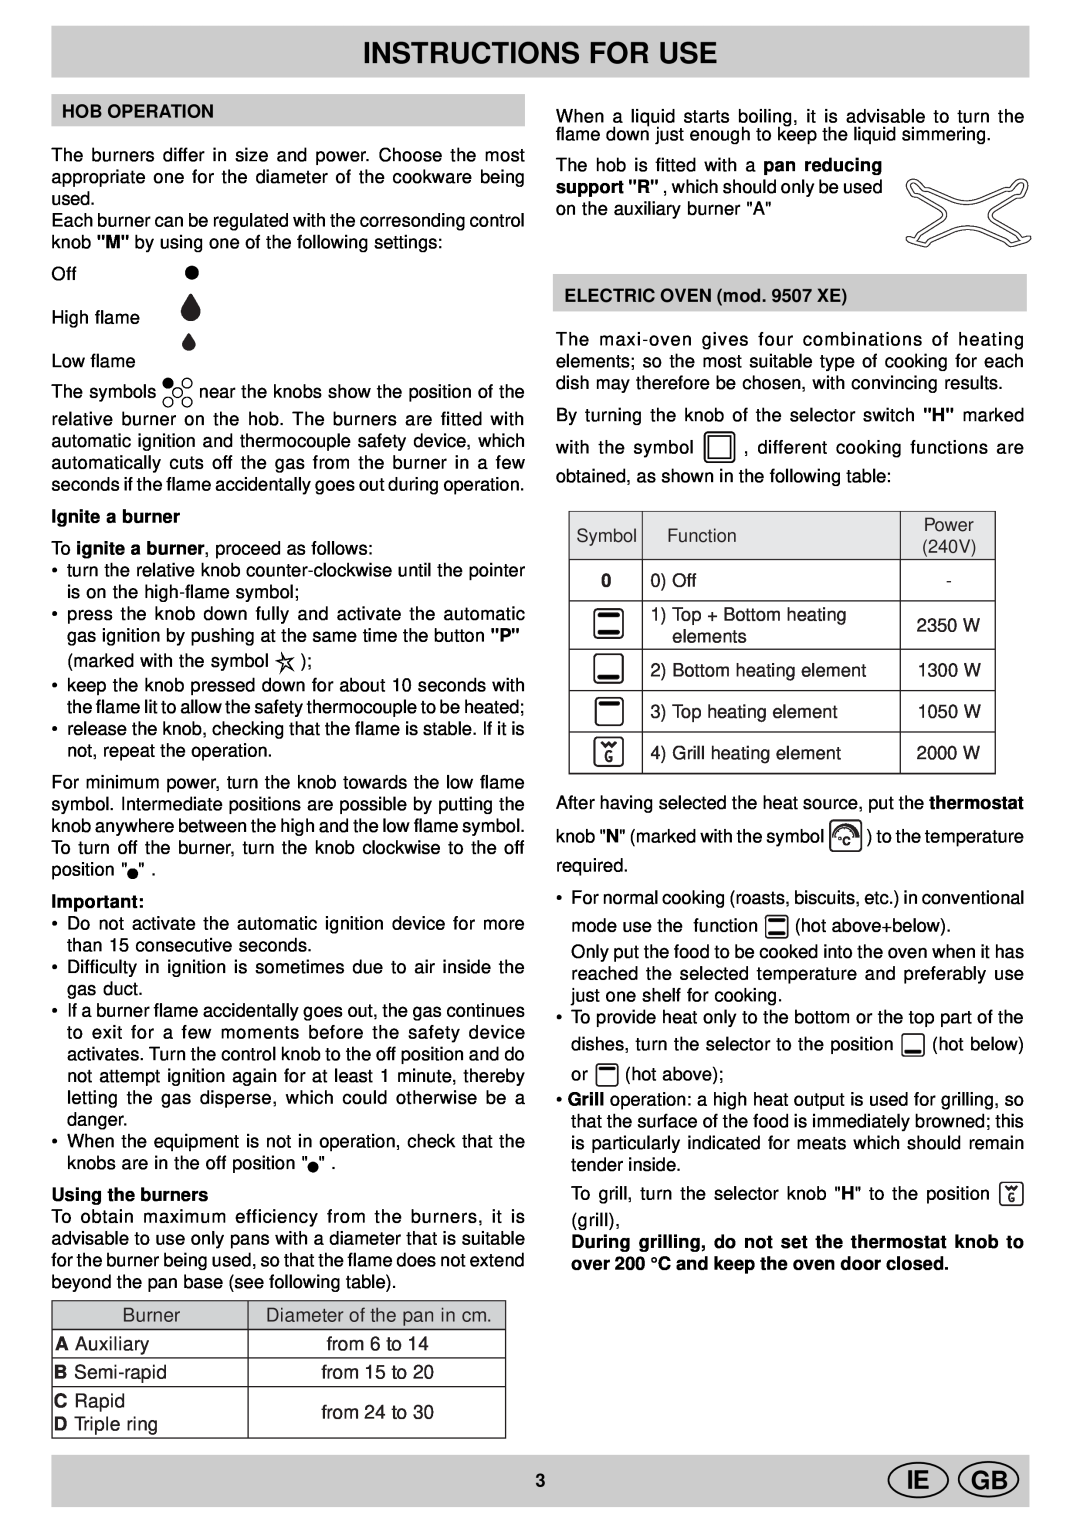 Indesit KP 9507 EB, KP 958 MS.B manual Instructions For Use, Ie Gb, Hob Operation, Ignite a burner, Using the burners 